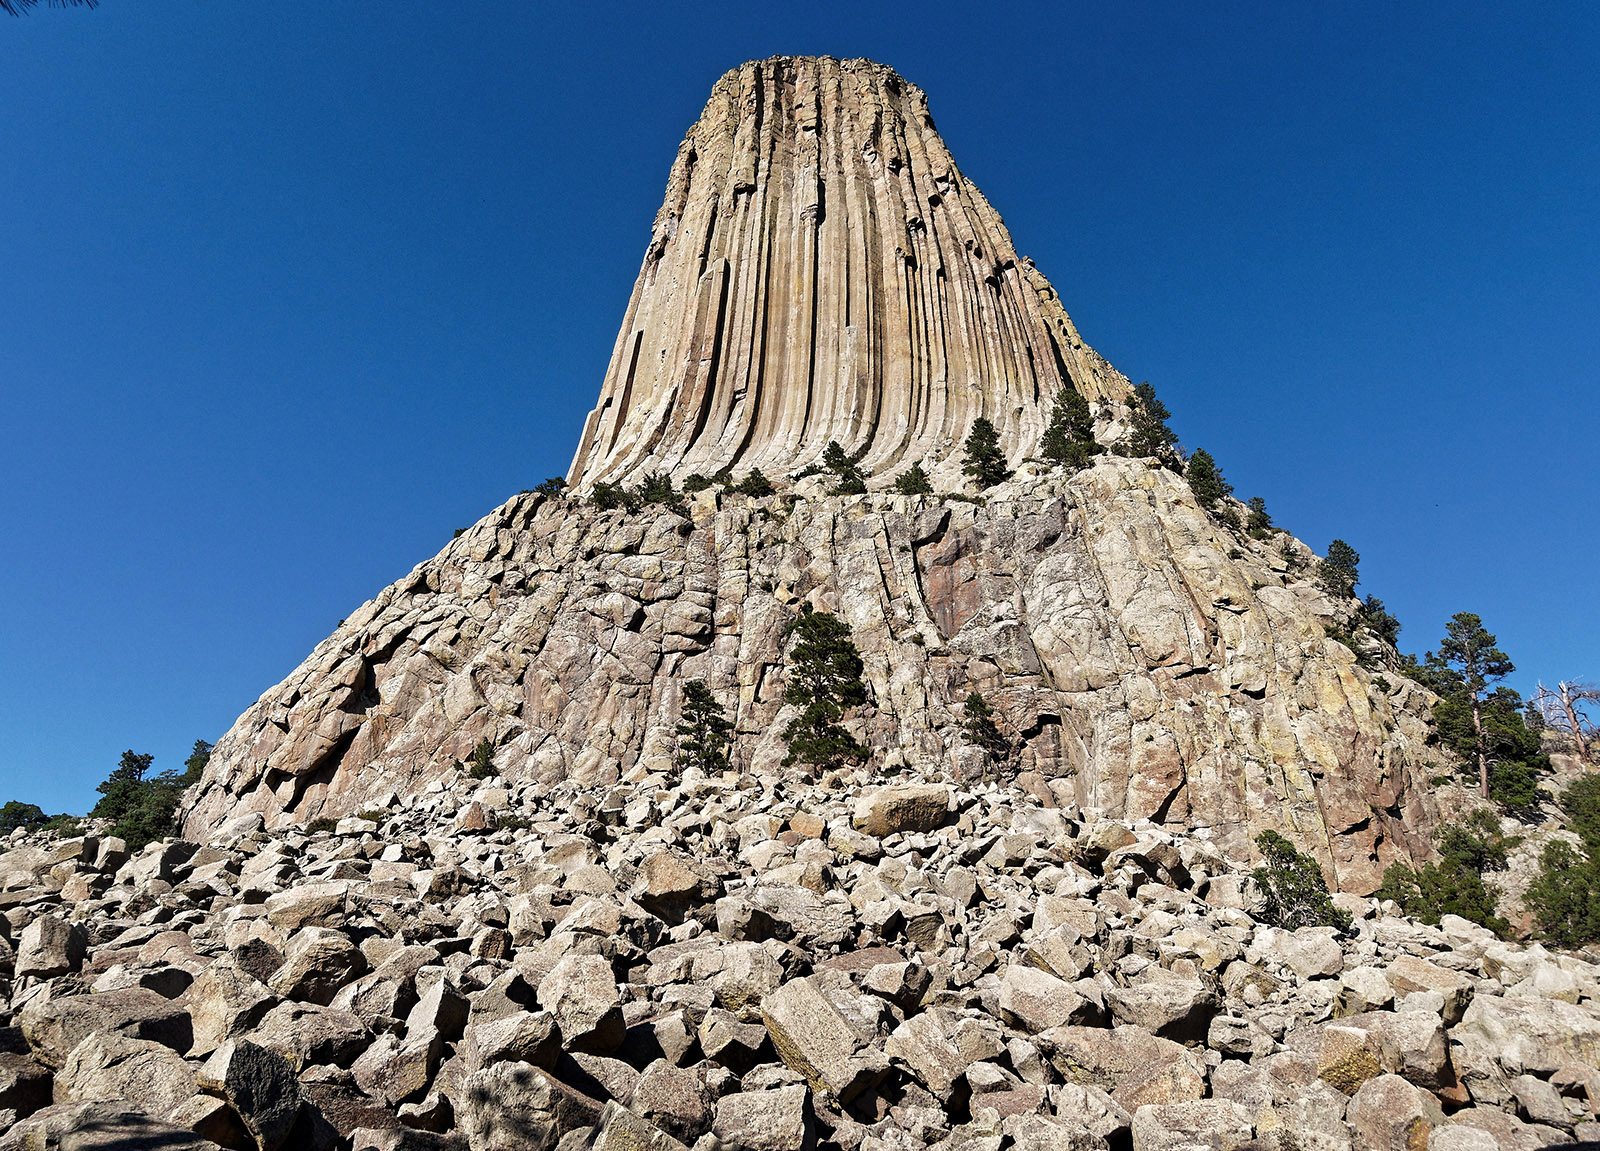 The bulbous base at the foot of Tower is often cited as evidence that Devils Tower is a laccolith, rather than a volcanic vent.